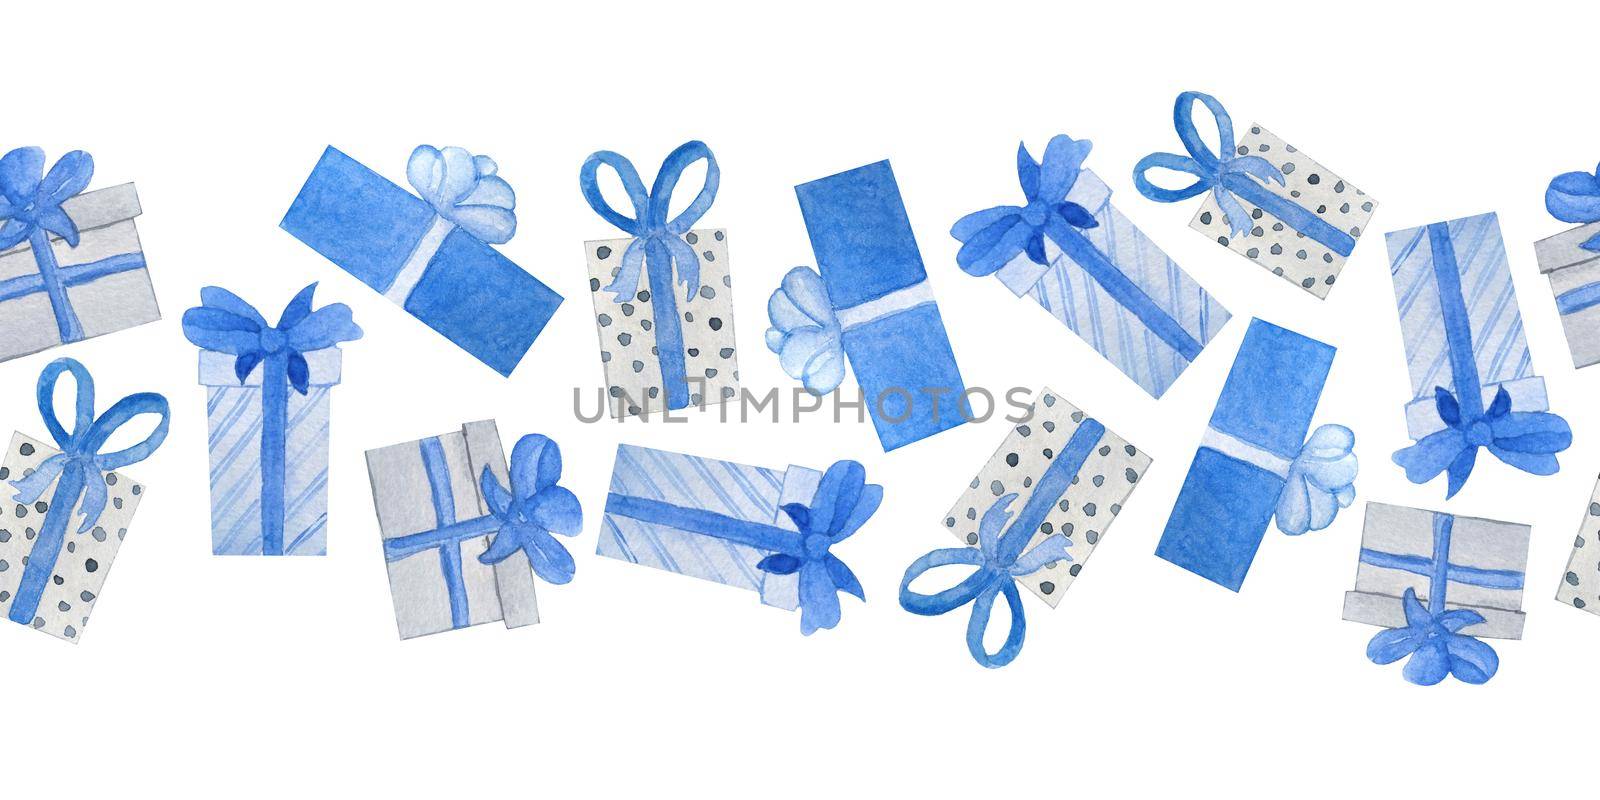 Watercolor seamless hand drawn horizontal border blue grey christmas gifts in decor wrapping paper with bows. Nordic scandinavian neutral colors for new year celebration cards background. Box with bows